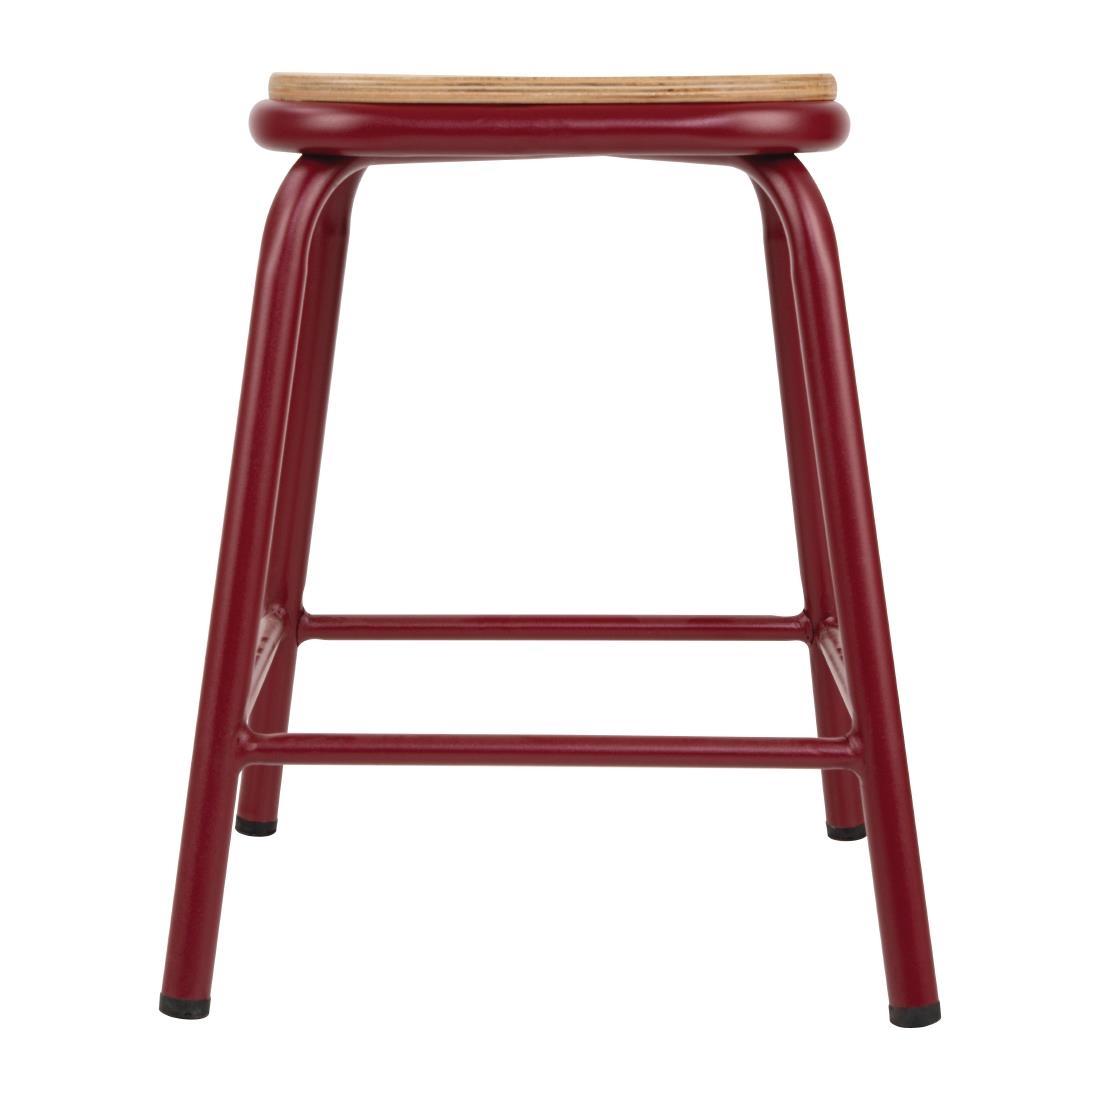 Bolero Cantina Low Stools with Wooden Seat Pad Wine Red (Pack of 4) - FB931  - 2